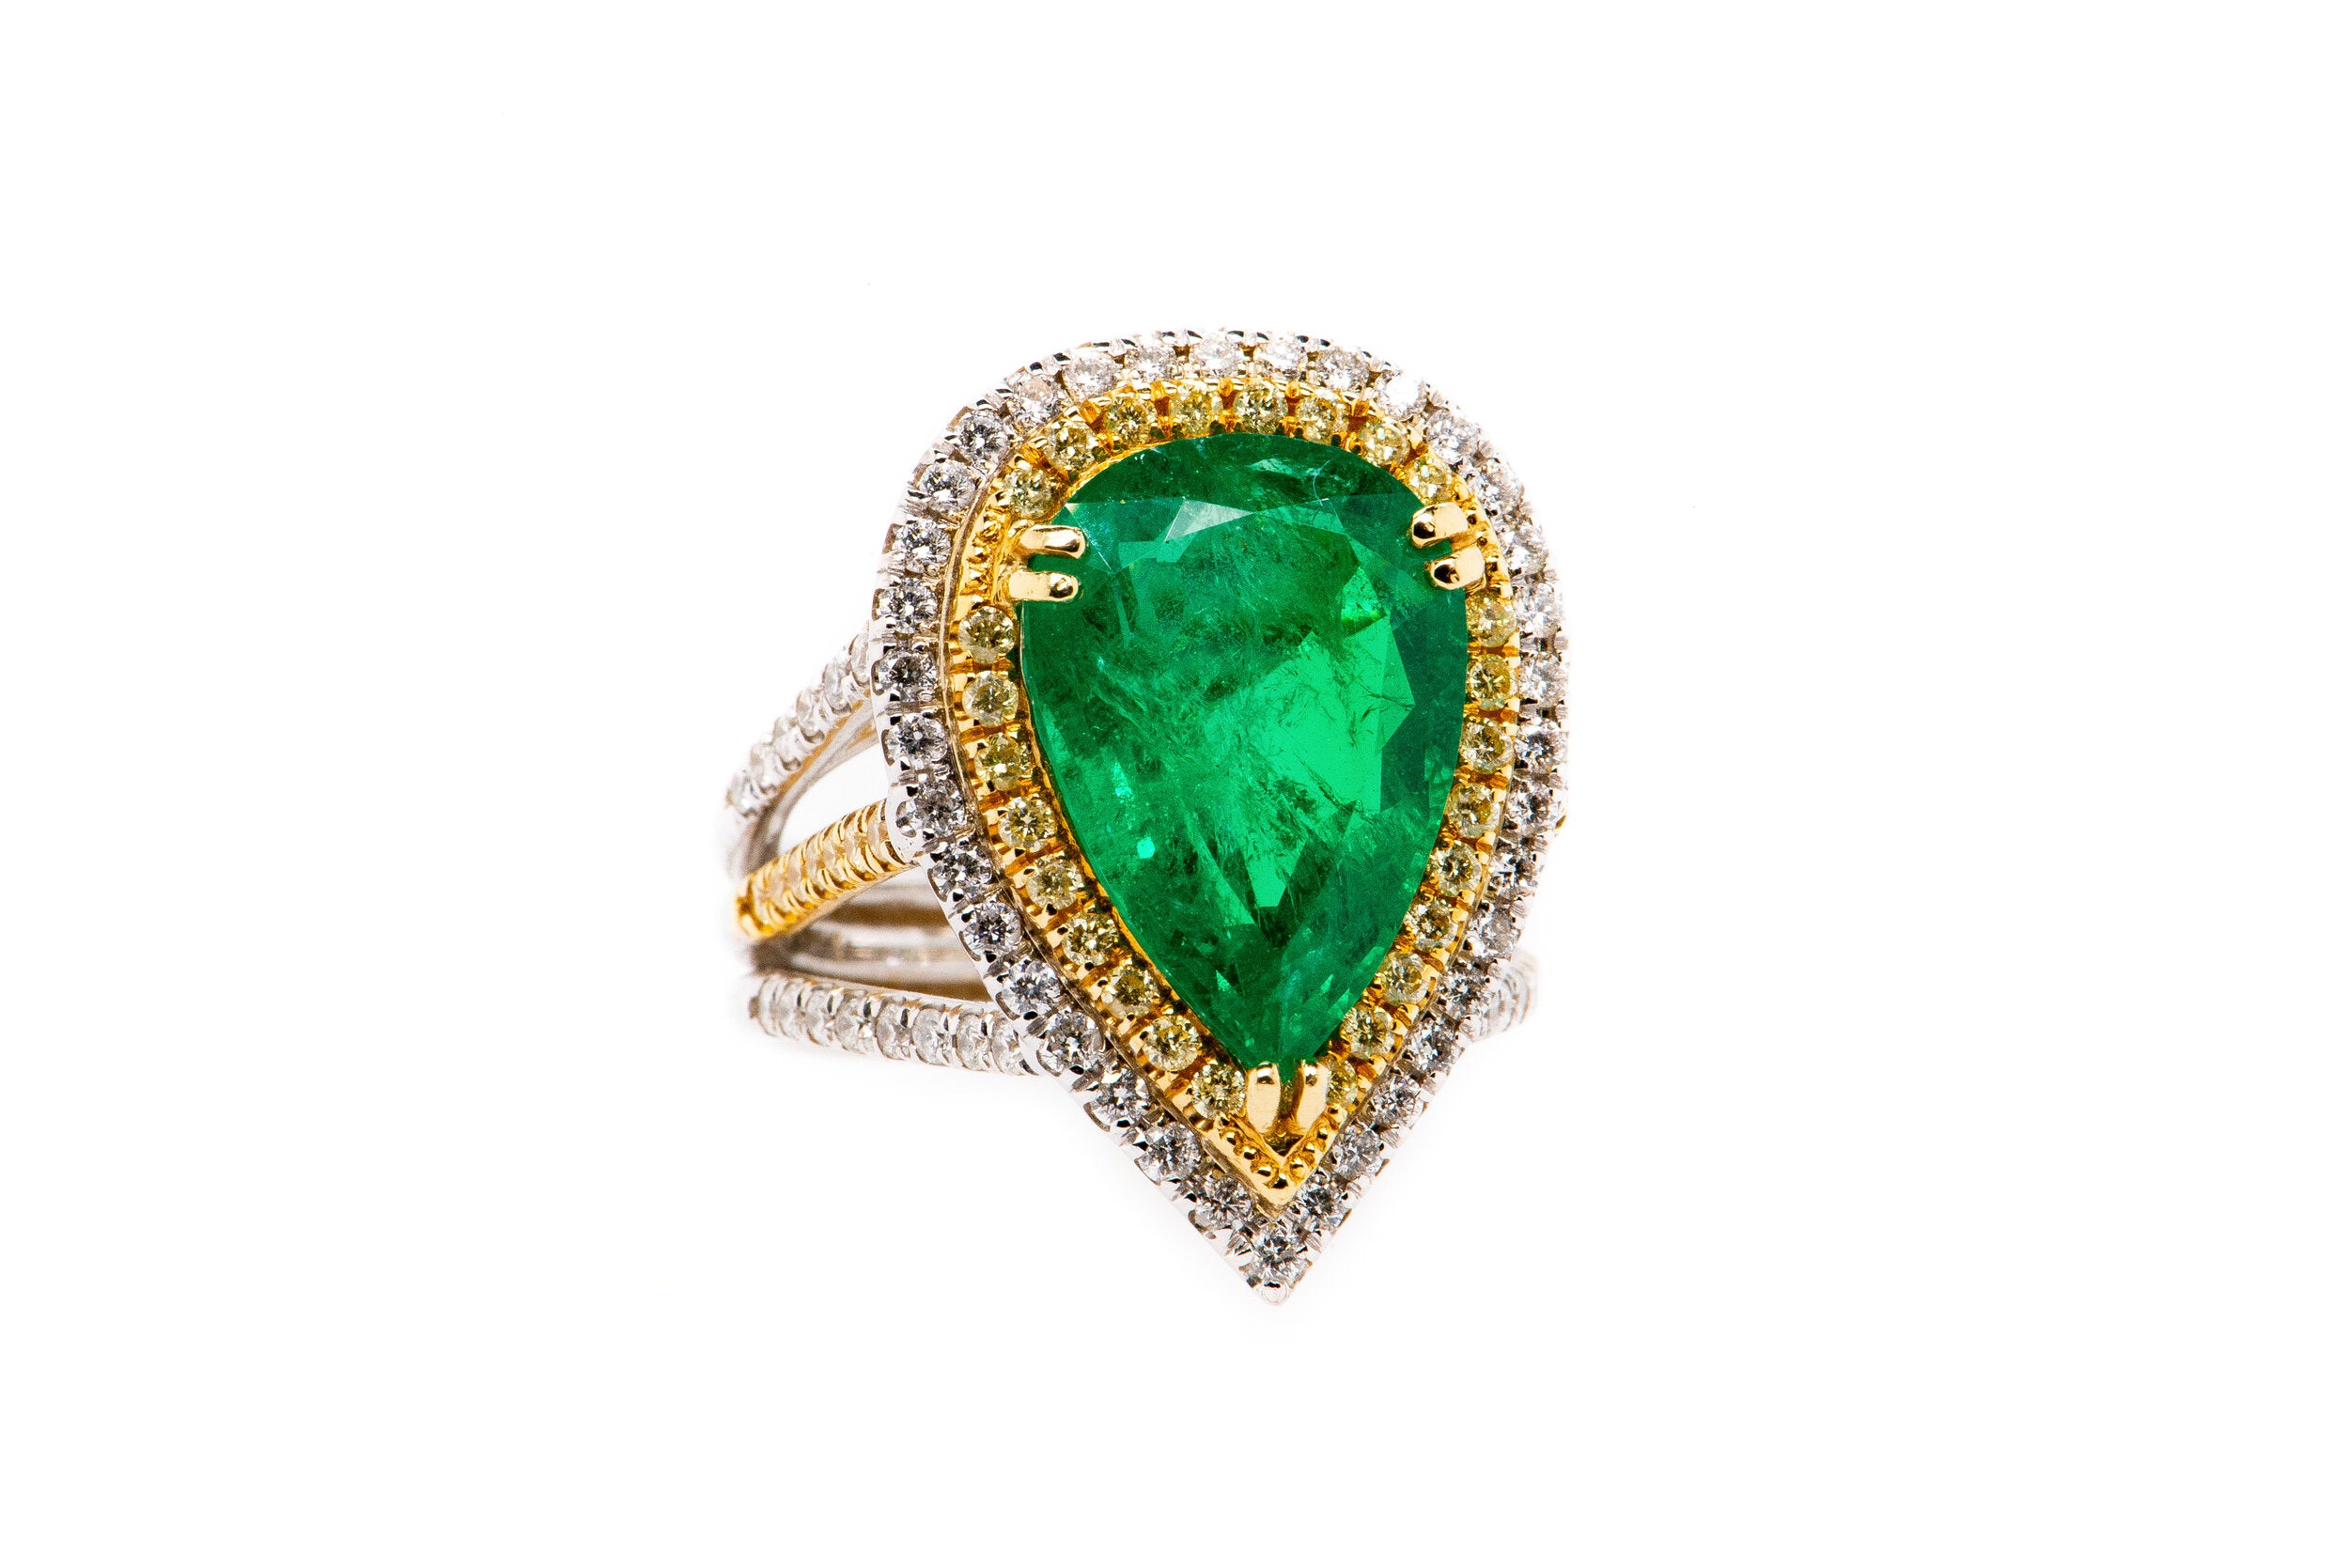 The Unique Collection: 6.91 ct Pear Shape Emerald in Two Tone Yellow and White Diamond Custom Setting